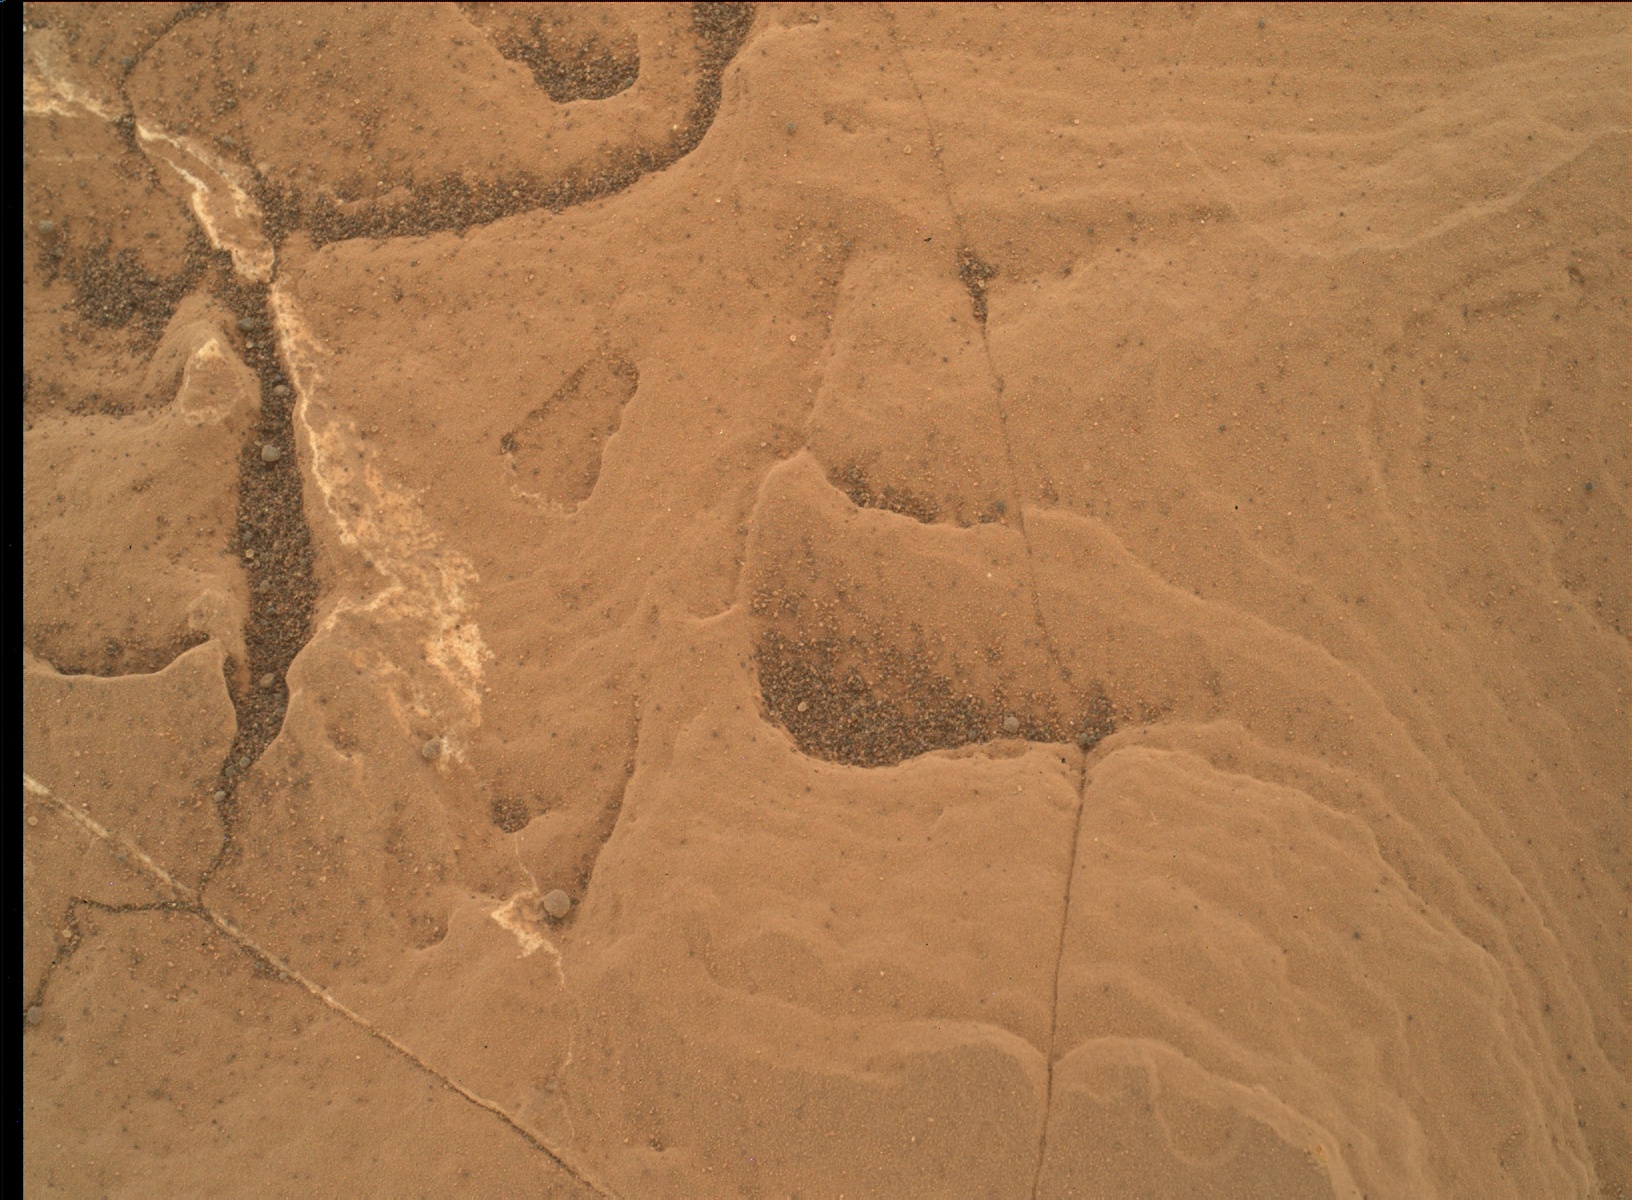 Nasa's Mars rover Curiosity acquired this image using its Mars Hand Lens Imager (MAHLI) on Sol 1736